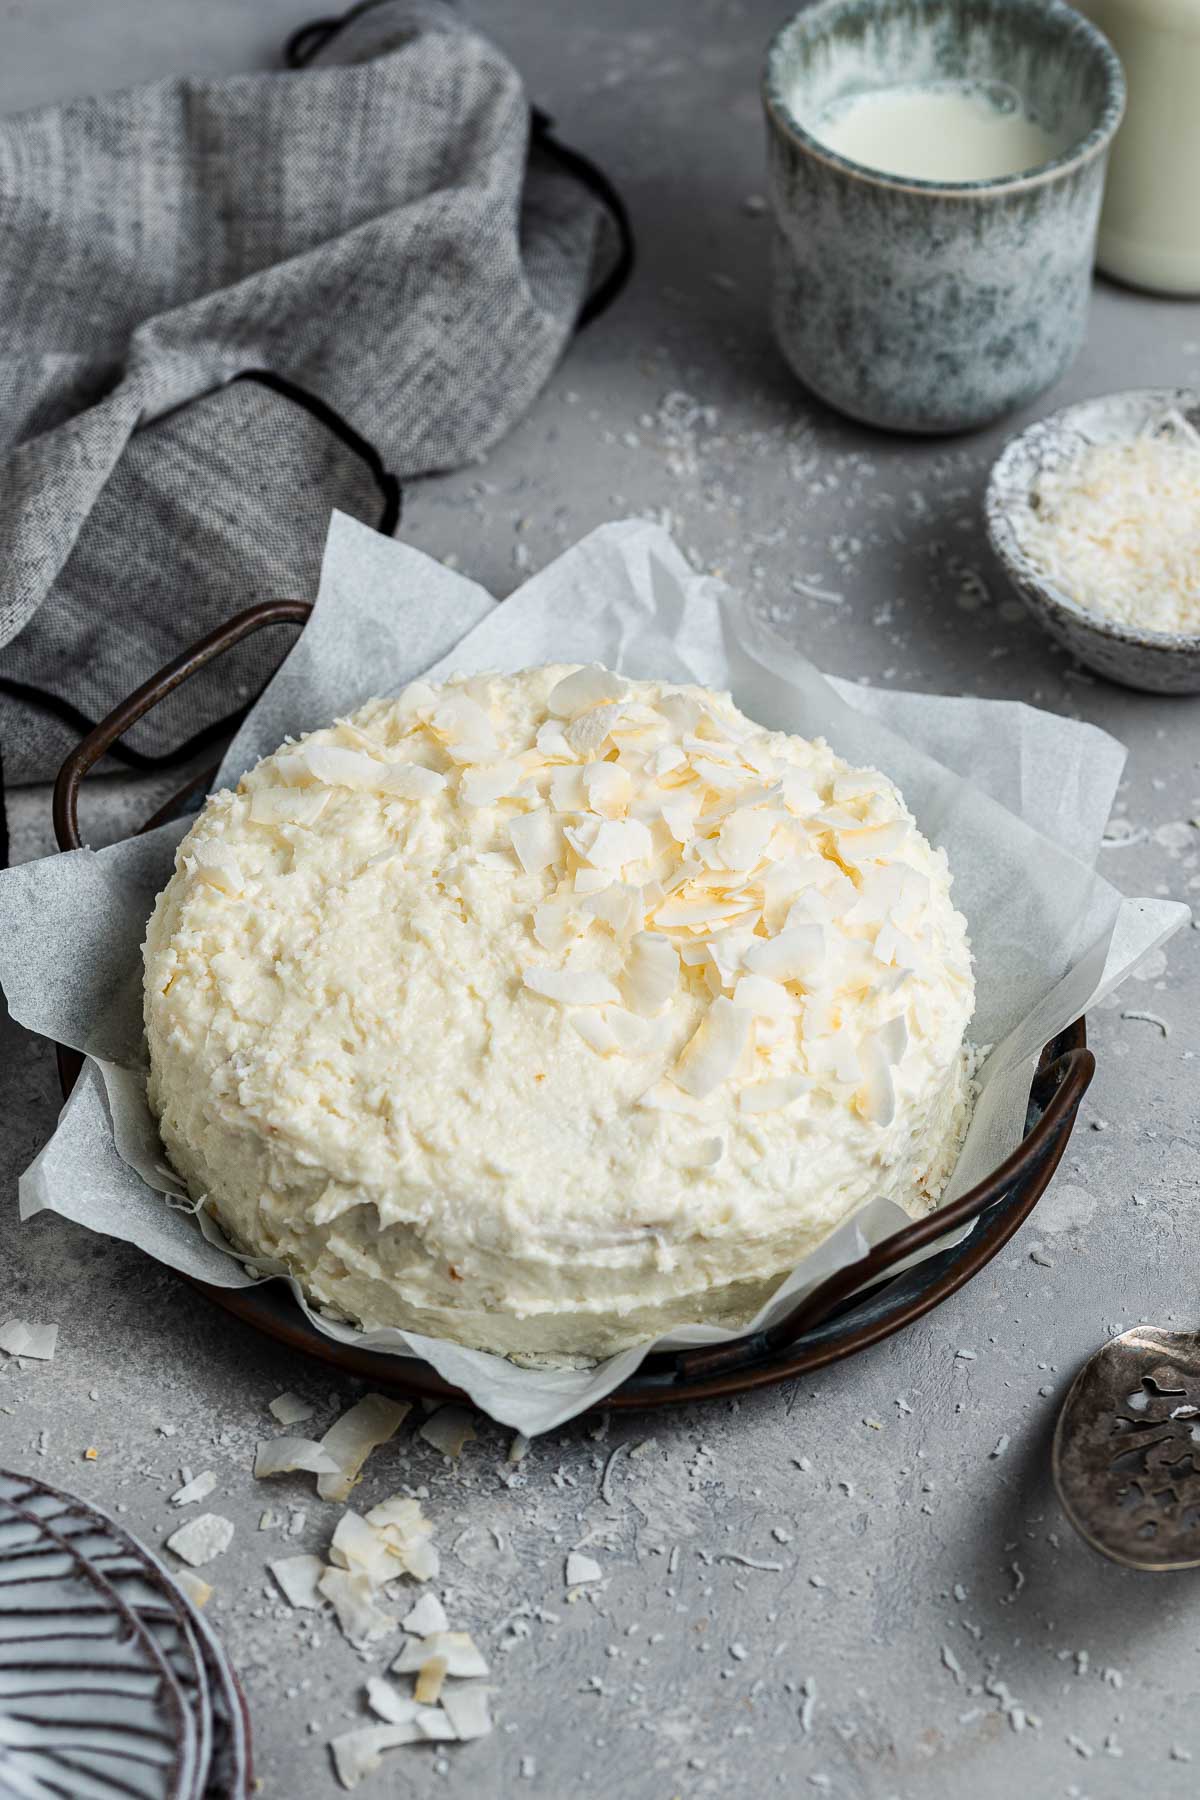 Small white coconut cake decorated with fresh coconut flakes.